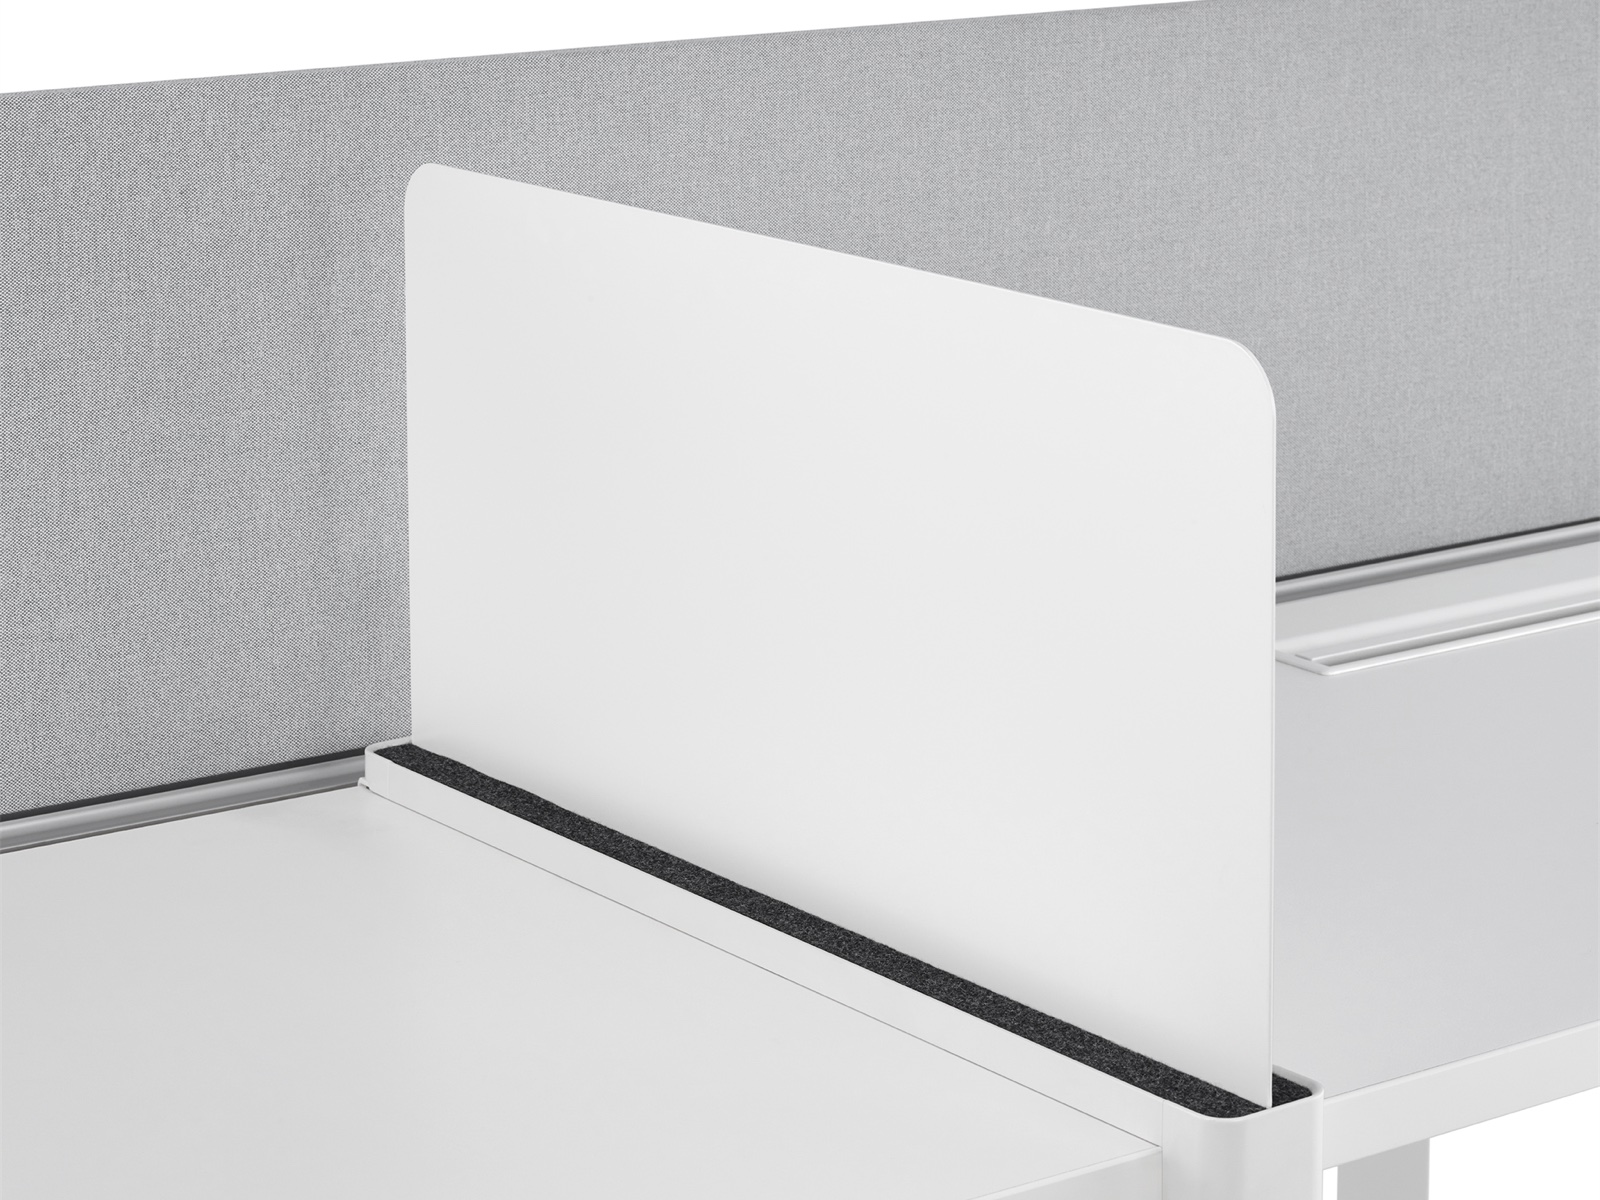 Close-up of a white Ubi Slim Screen, installed on a Layout Studio work surface.